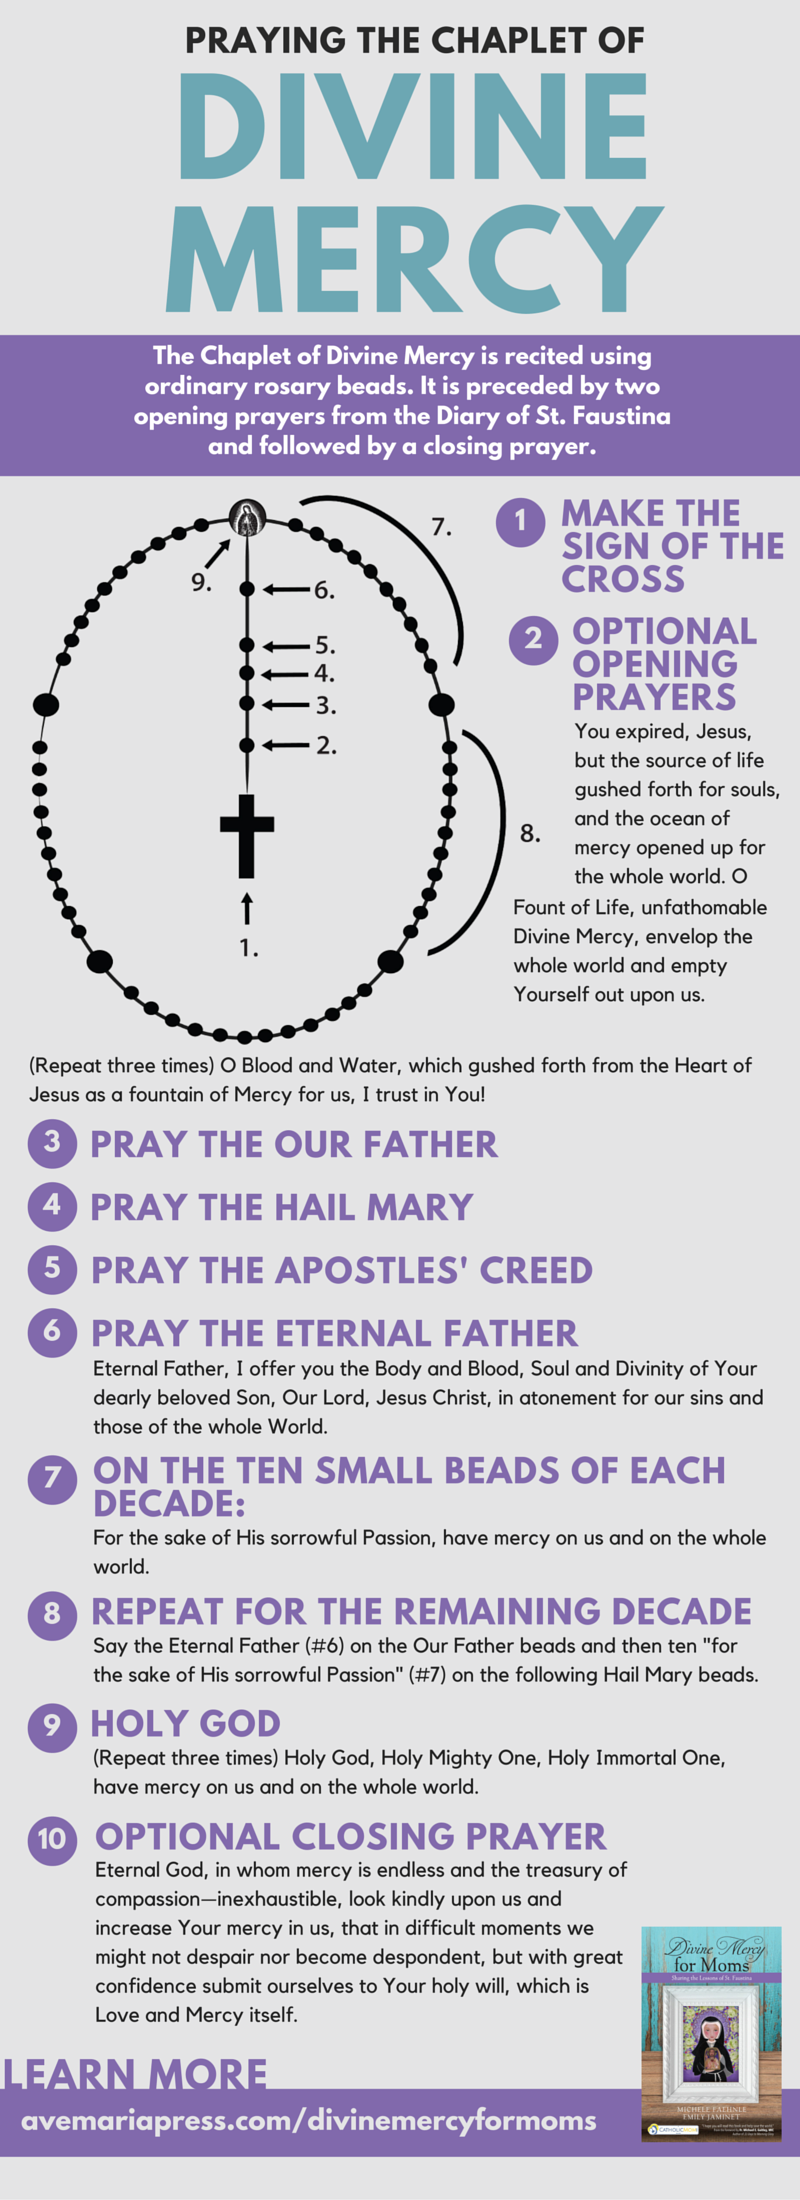 Ever wonder how to pray the Divine Mercy Chaplet on a rosary? #DivineMercy4Moms